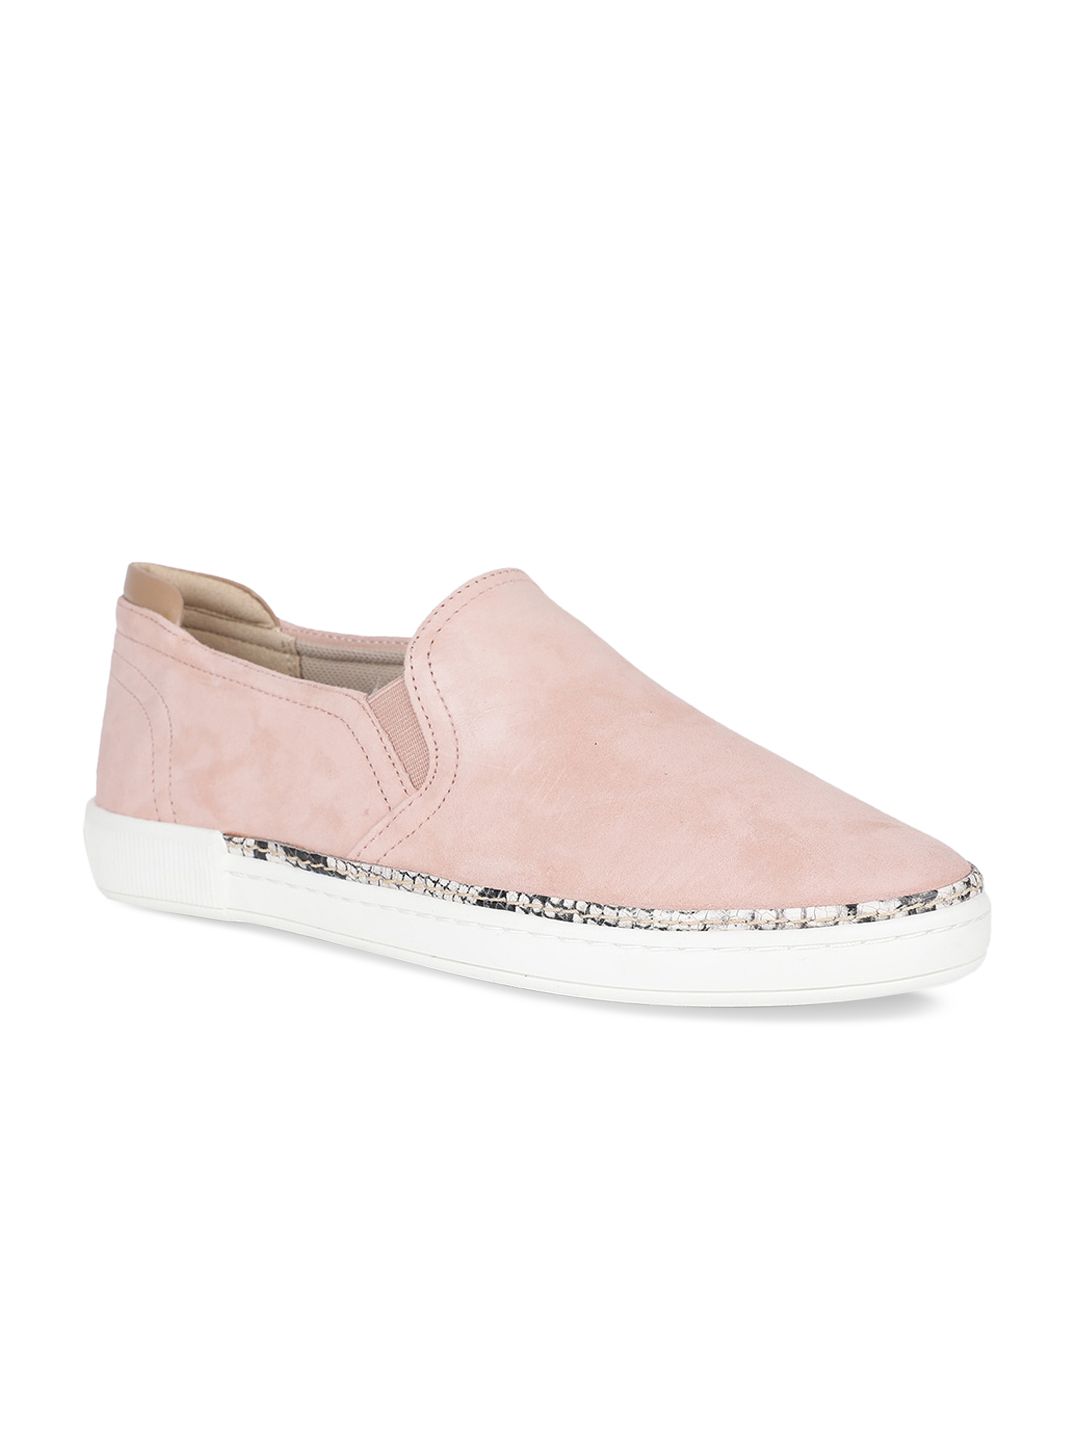 Naturalizer Women Pink Slip-On Sneakers Price in India